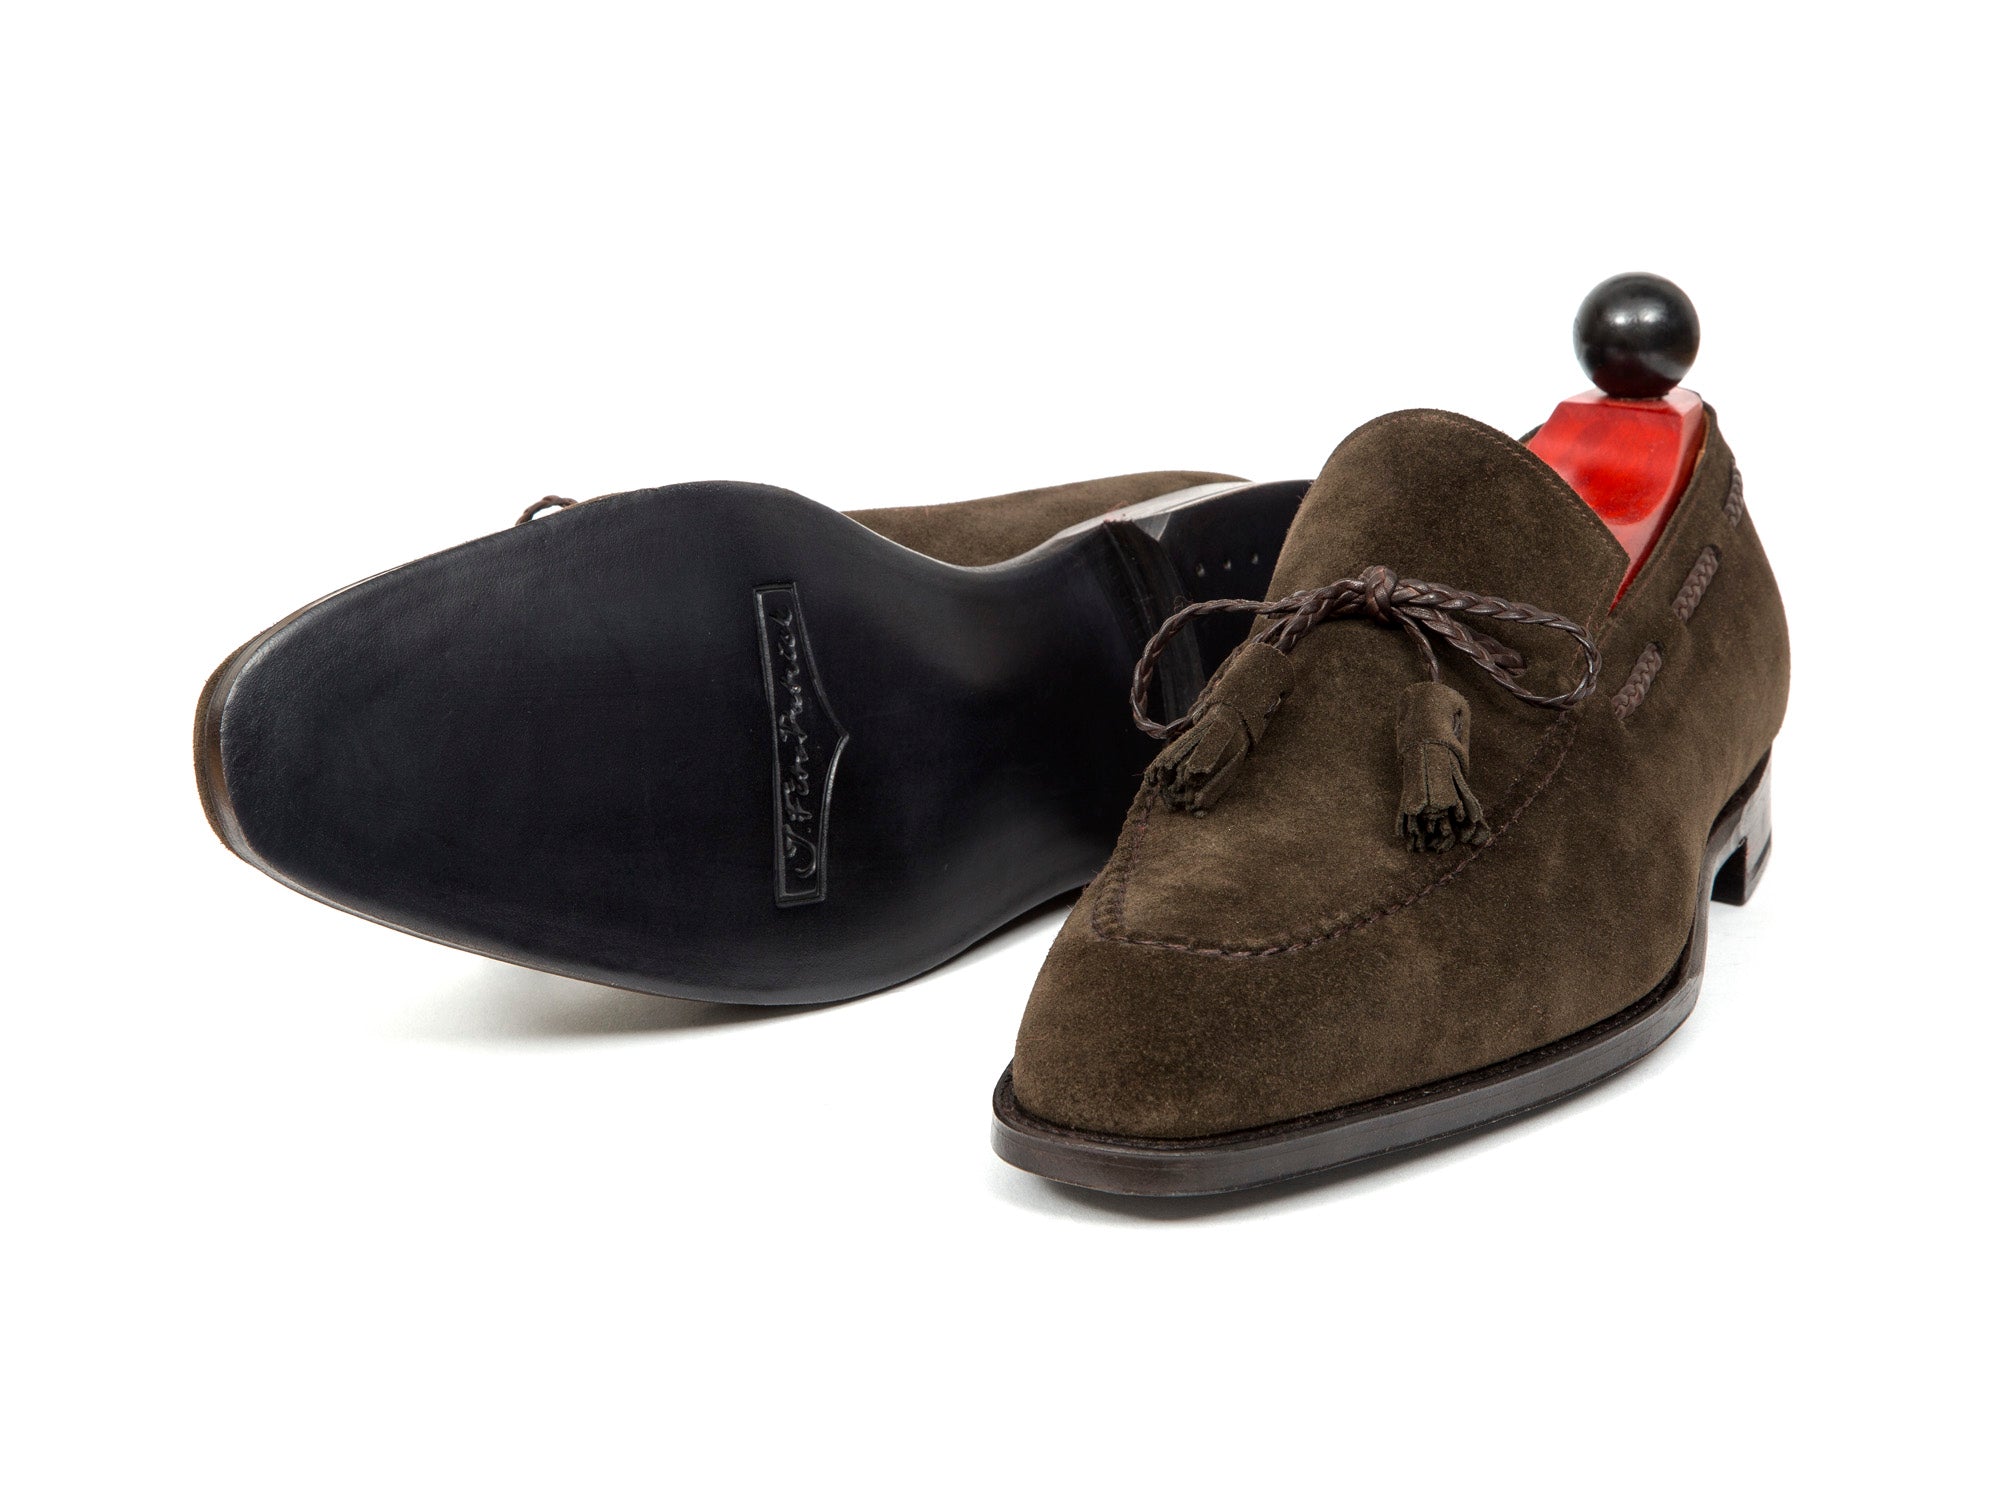 Issaquah - MTO - Moss Suede - LPB Last - Single Leather Sole